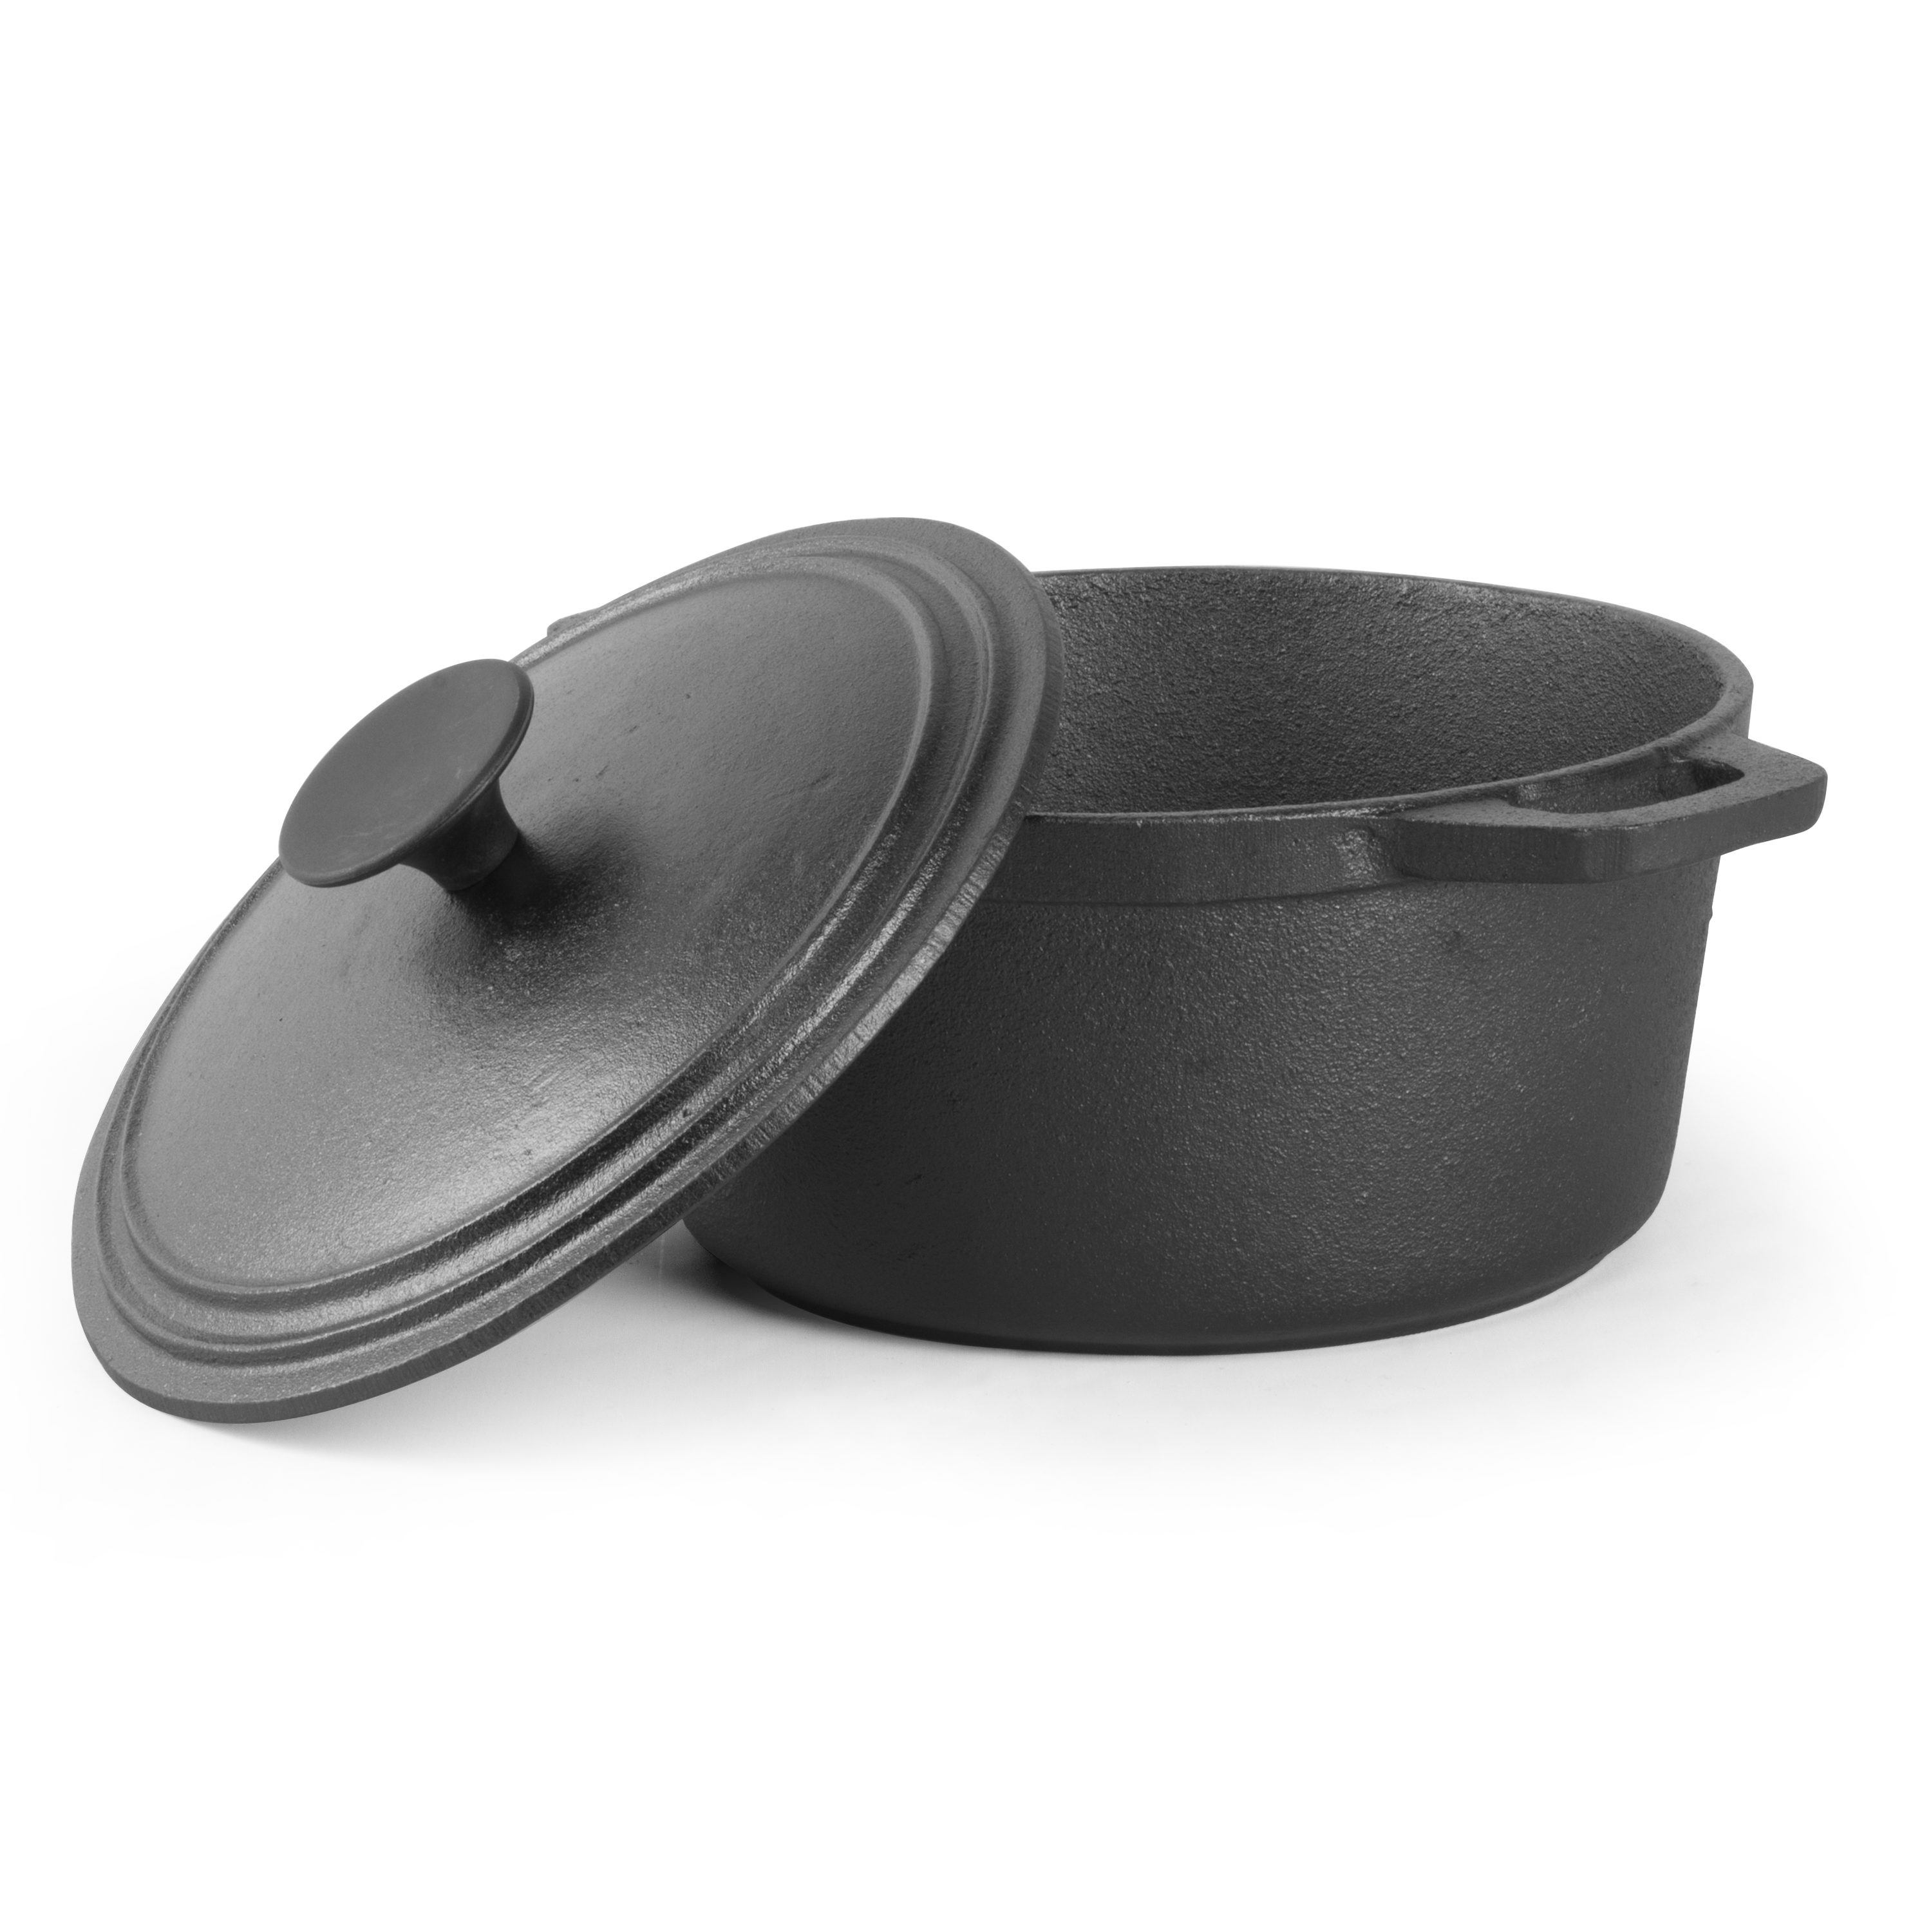 Cook Pro 6 qt. Round Cast Iron Dutch Oven in Black with Lid